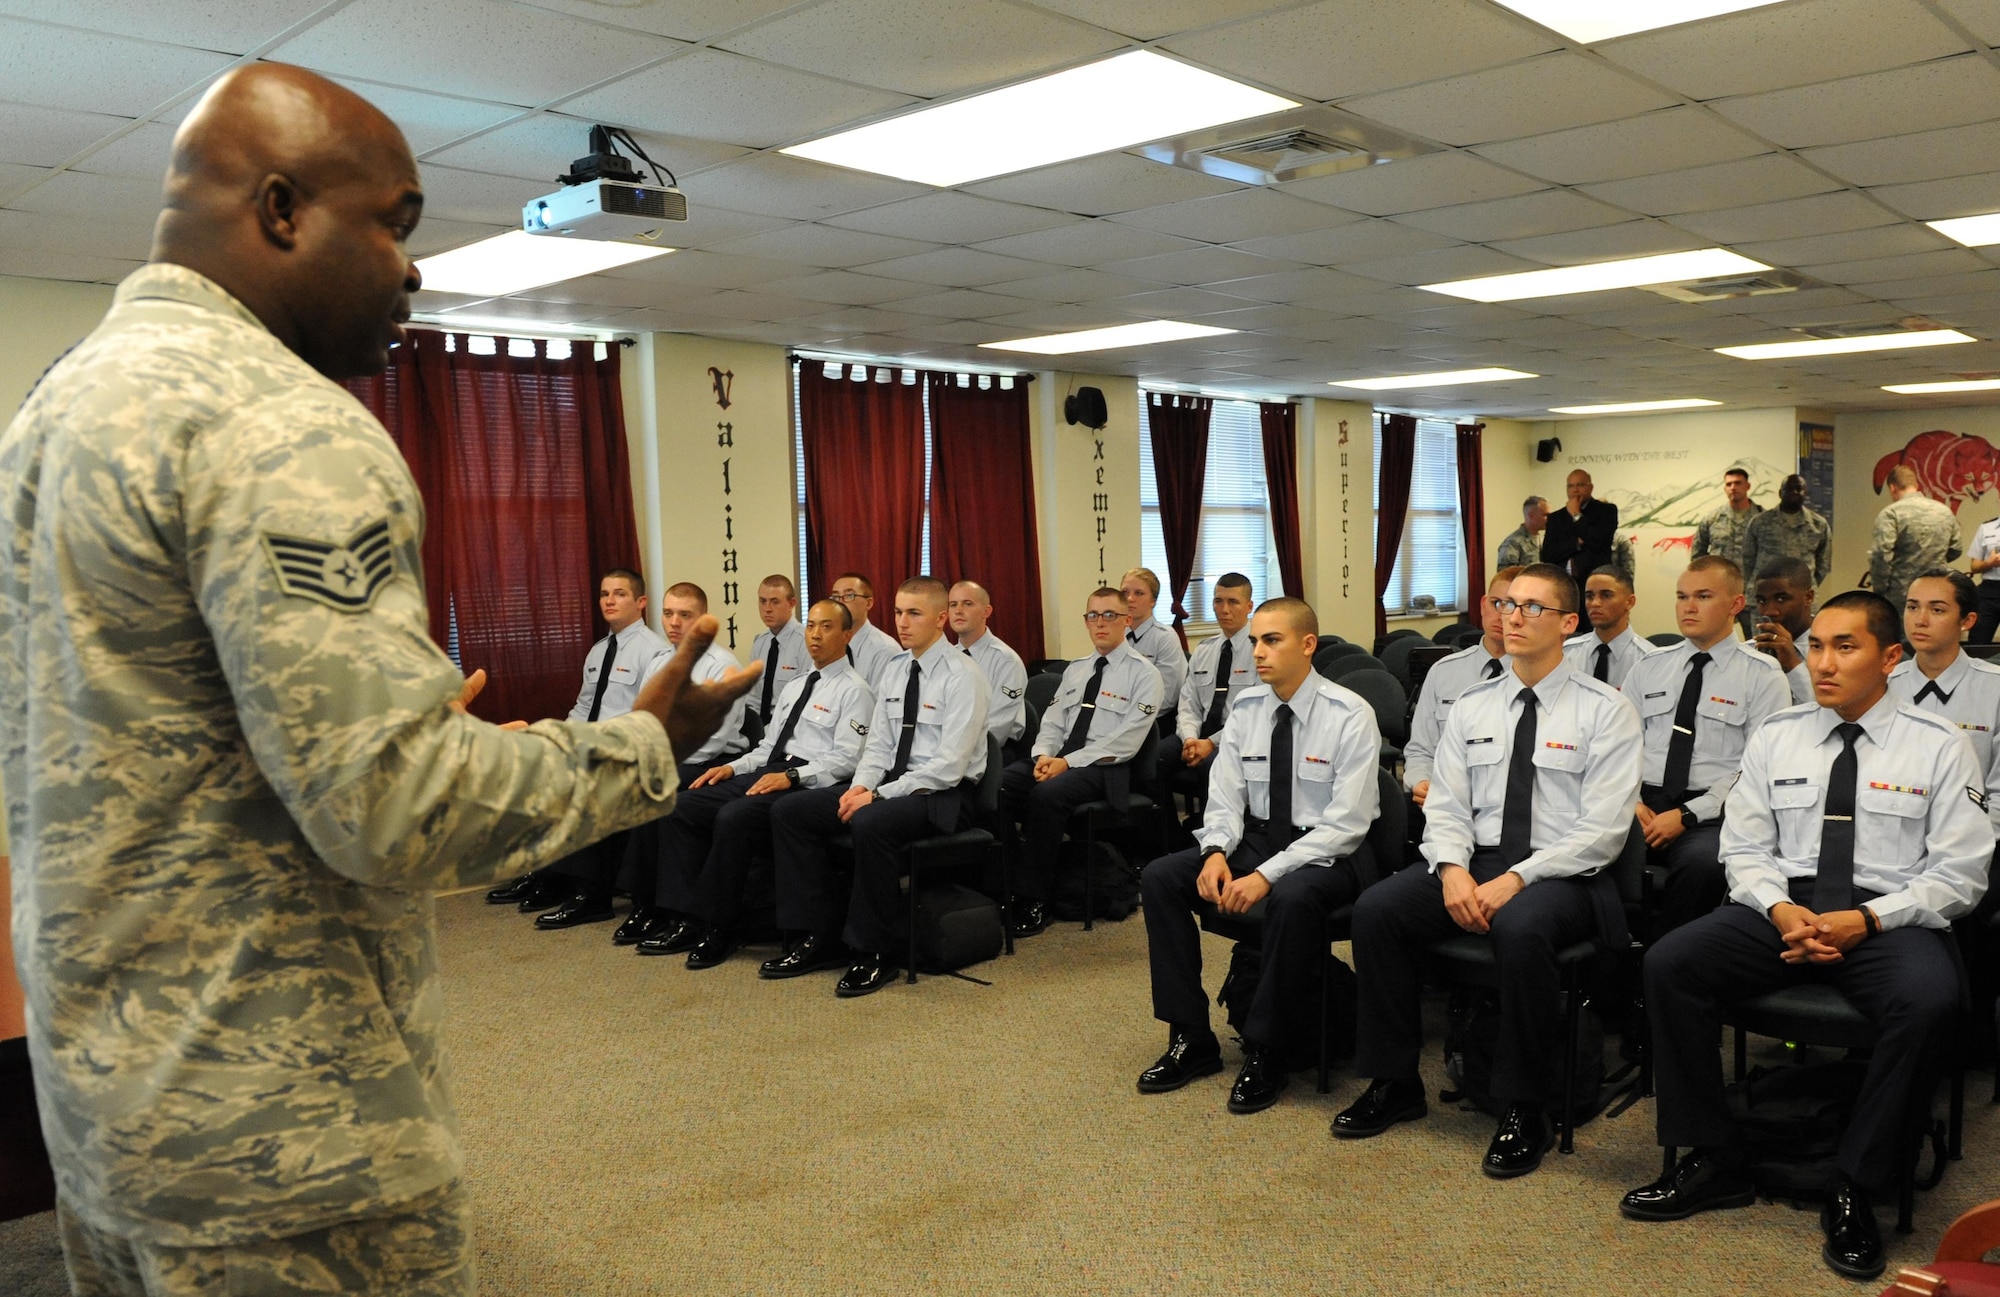 Staff Sgt. Robinson Divert, 334th Training Squadron military training leader, provides a resiliency training session as Senior Executive Service, Chevalier P. “Chevy” Cleaves, Director, Diversity and Inclusion, Deputy Chief of Staff for Manpower, Personnel and Services, Headquarters U.S. Air Force, observes the class during an immersion tour with 2nd Air Force and the 81st Training Wing Nov. 19, 2015, Keesler Air Force Base, Miss.  Cleaves visit included a working lunch with base leadership, a Campaign to Zero brief, and a final formation observation. (U.S. Air Force photo by Kemberly Groue)